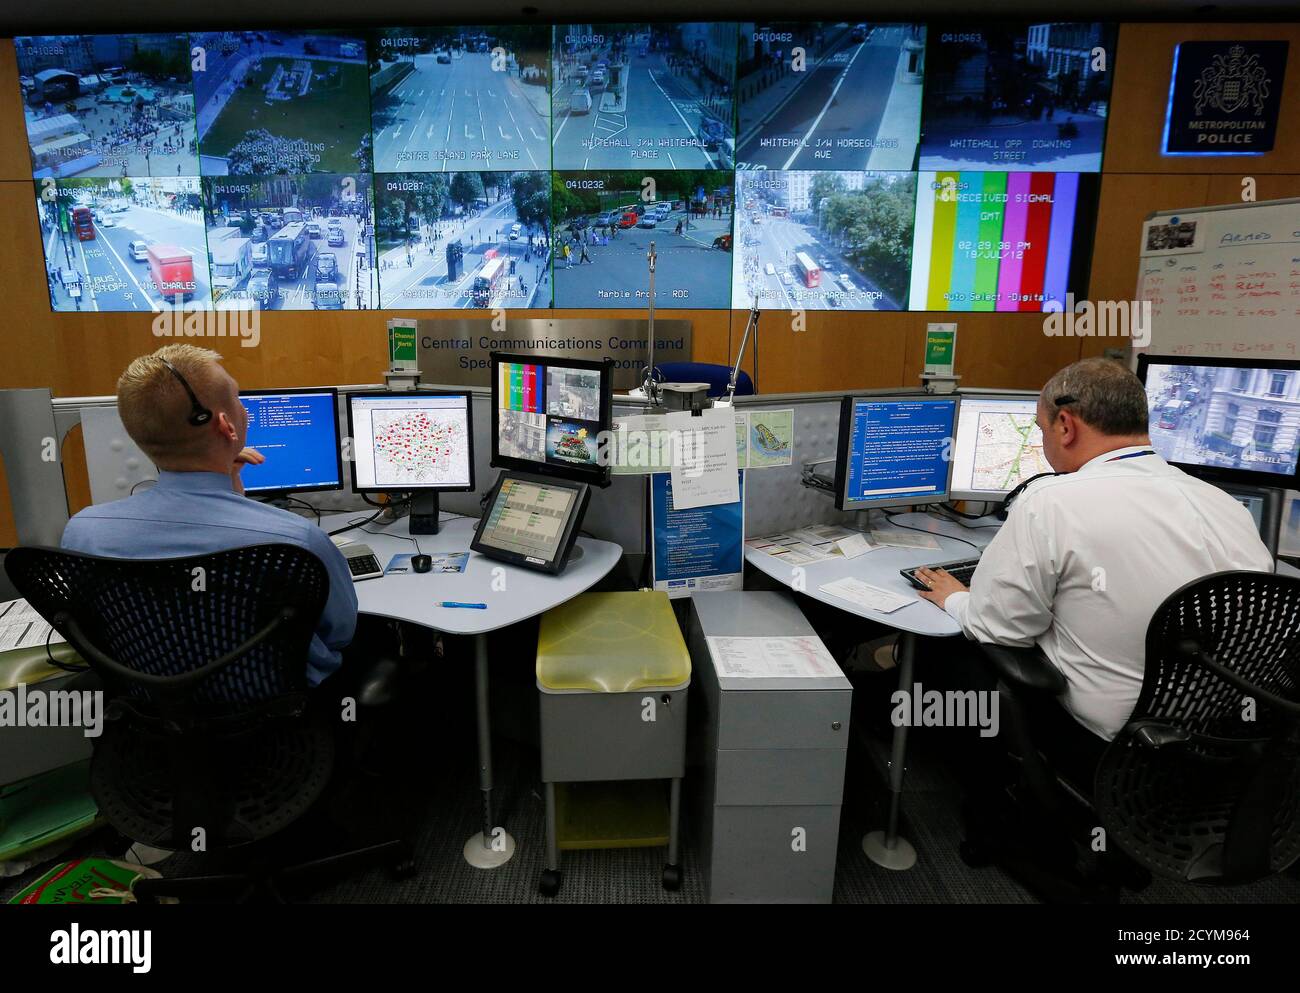 Police work in the Special Operations Room in central London July 19, 2012. The Special Operations room will be the police control room during the London 2012 Olympic Games. REUTERS/Suzanne Plunkett (BRITAIN - Tags: SPORT OLYMPICS SOCIETY) Stock Photo